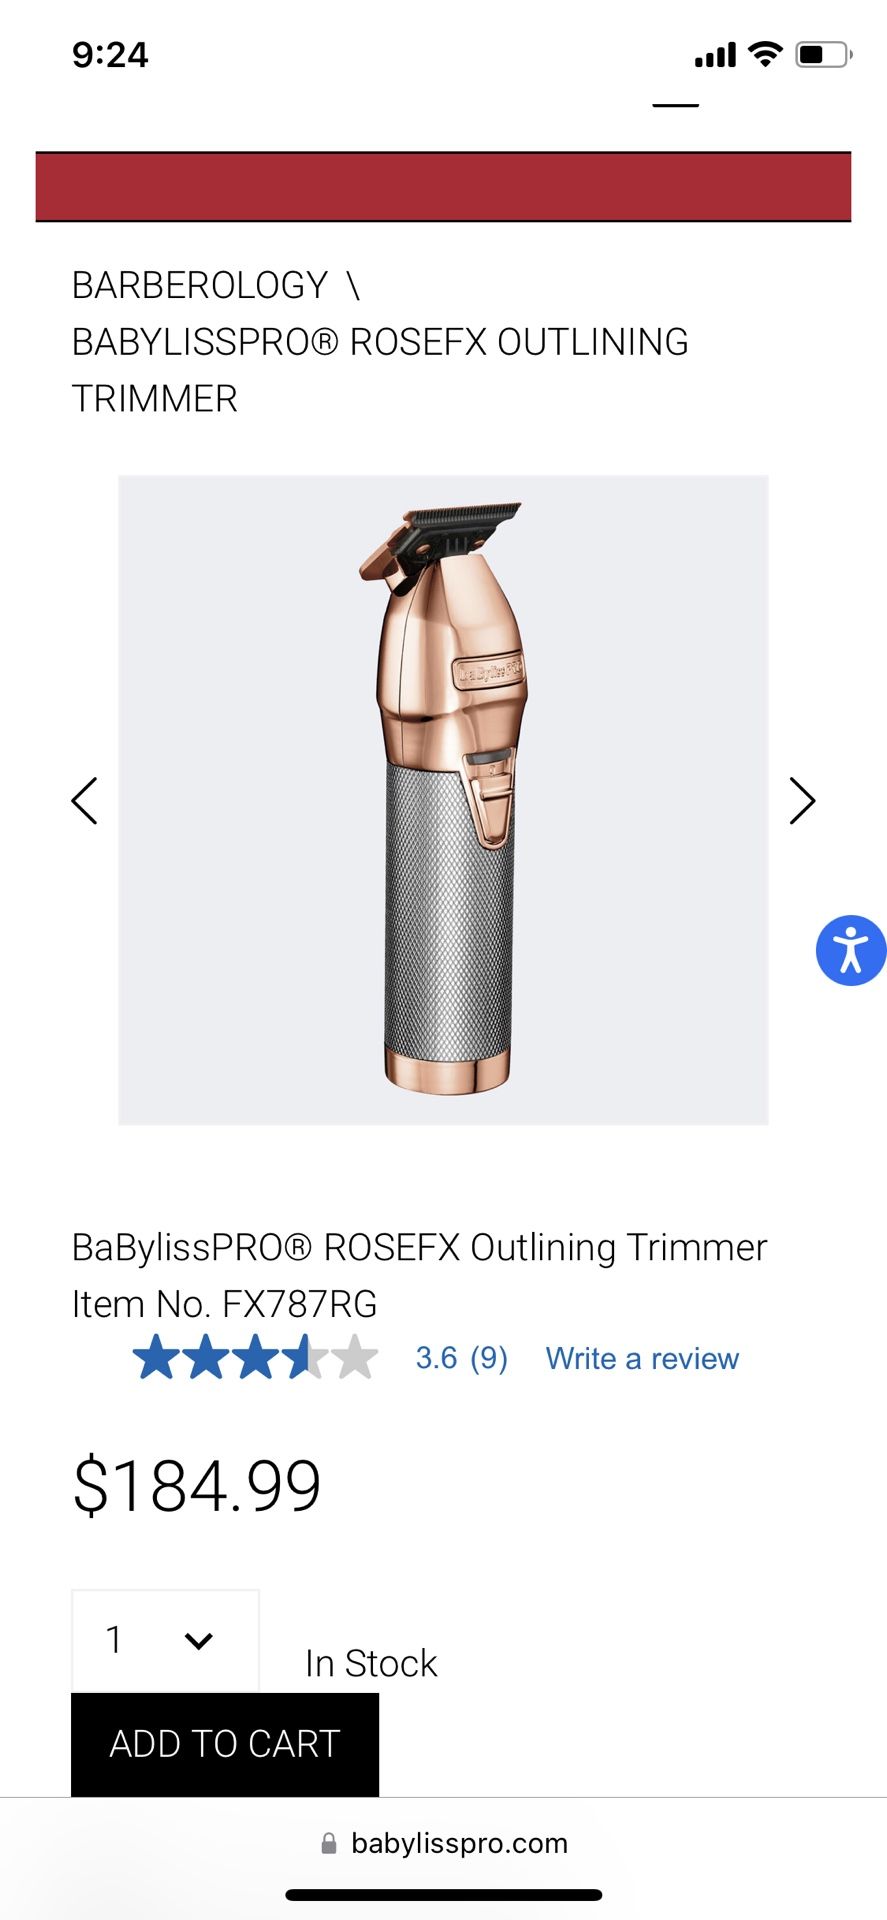 RoseFX Babyliss Trimmers